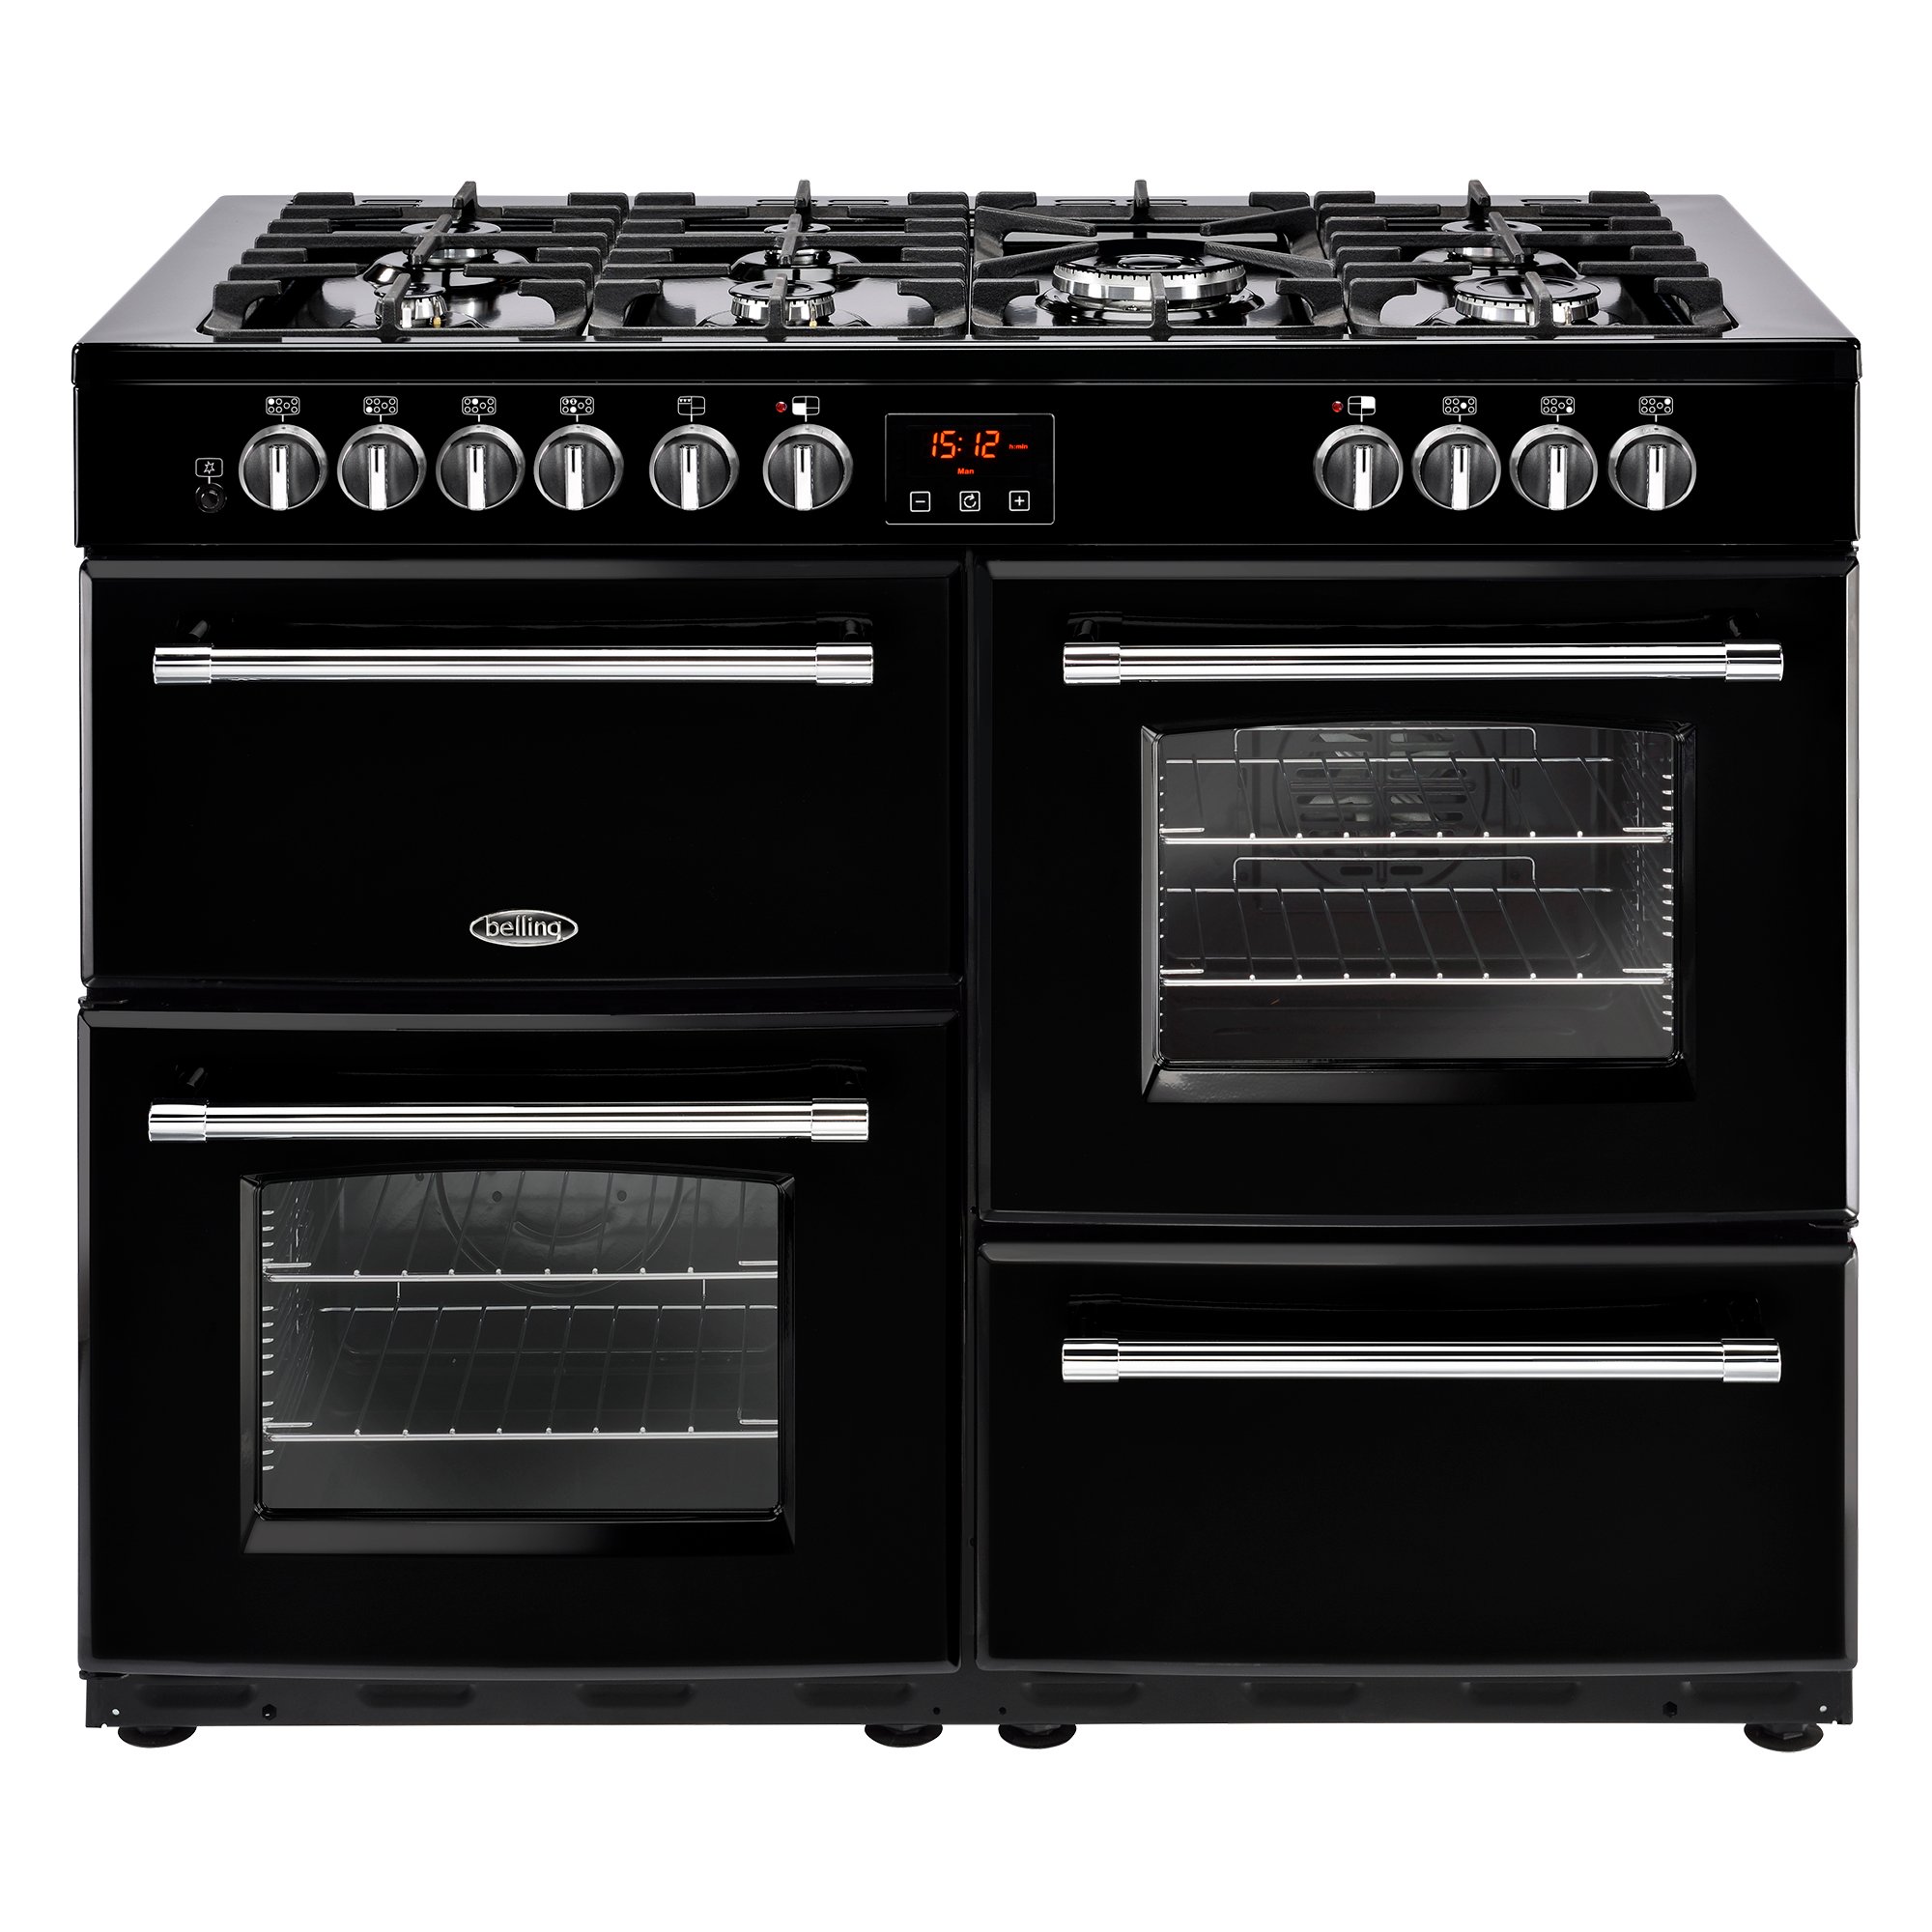 110cm dual fuel range cooker with 7 burner gas hob, 4kW PowerWok, Maxi-Clock and easy clean enamel.